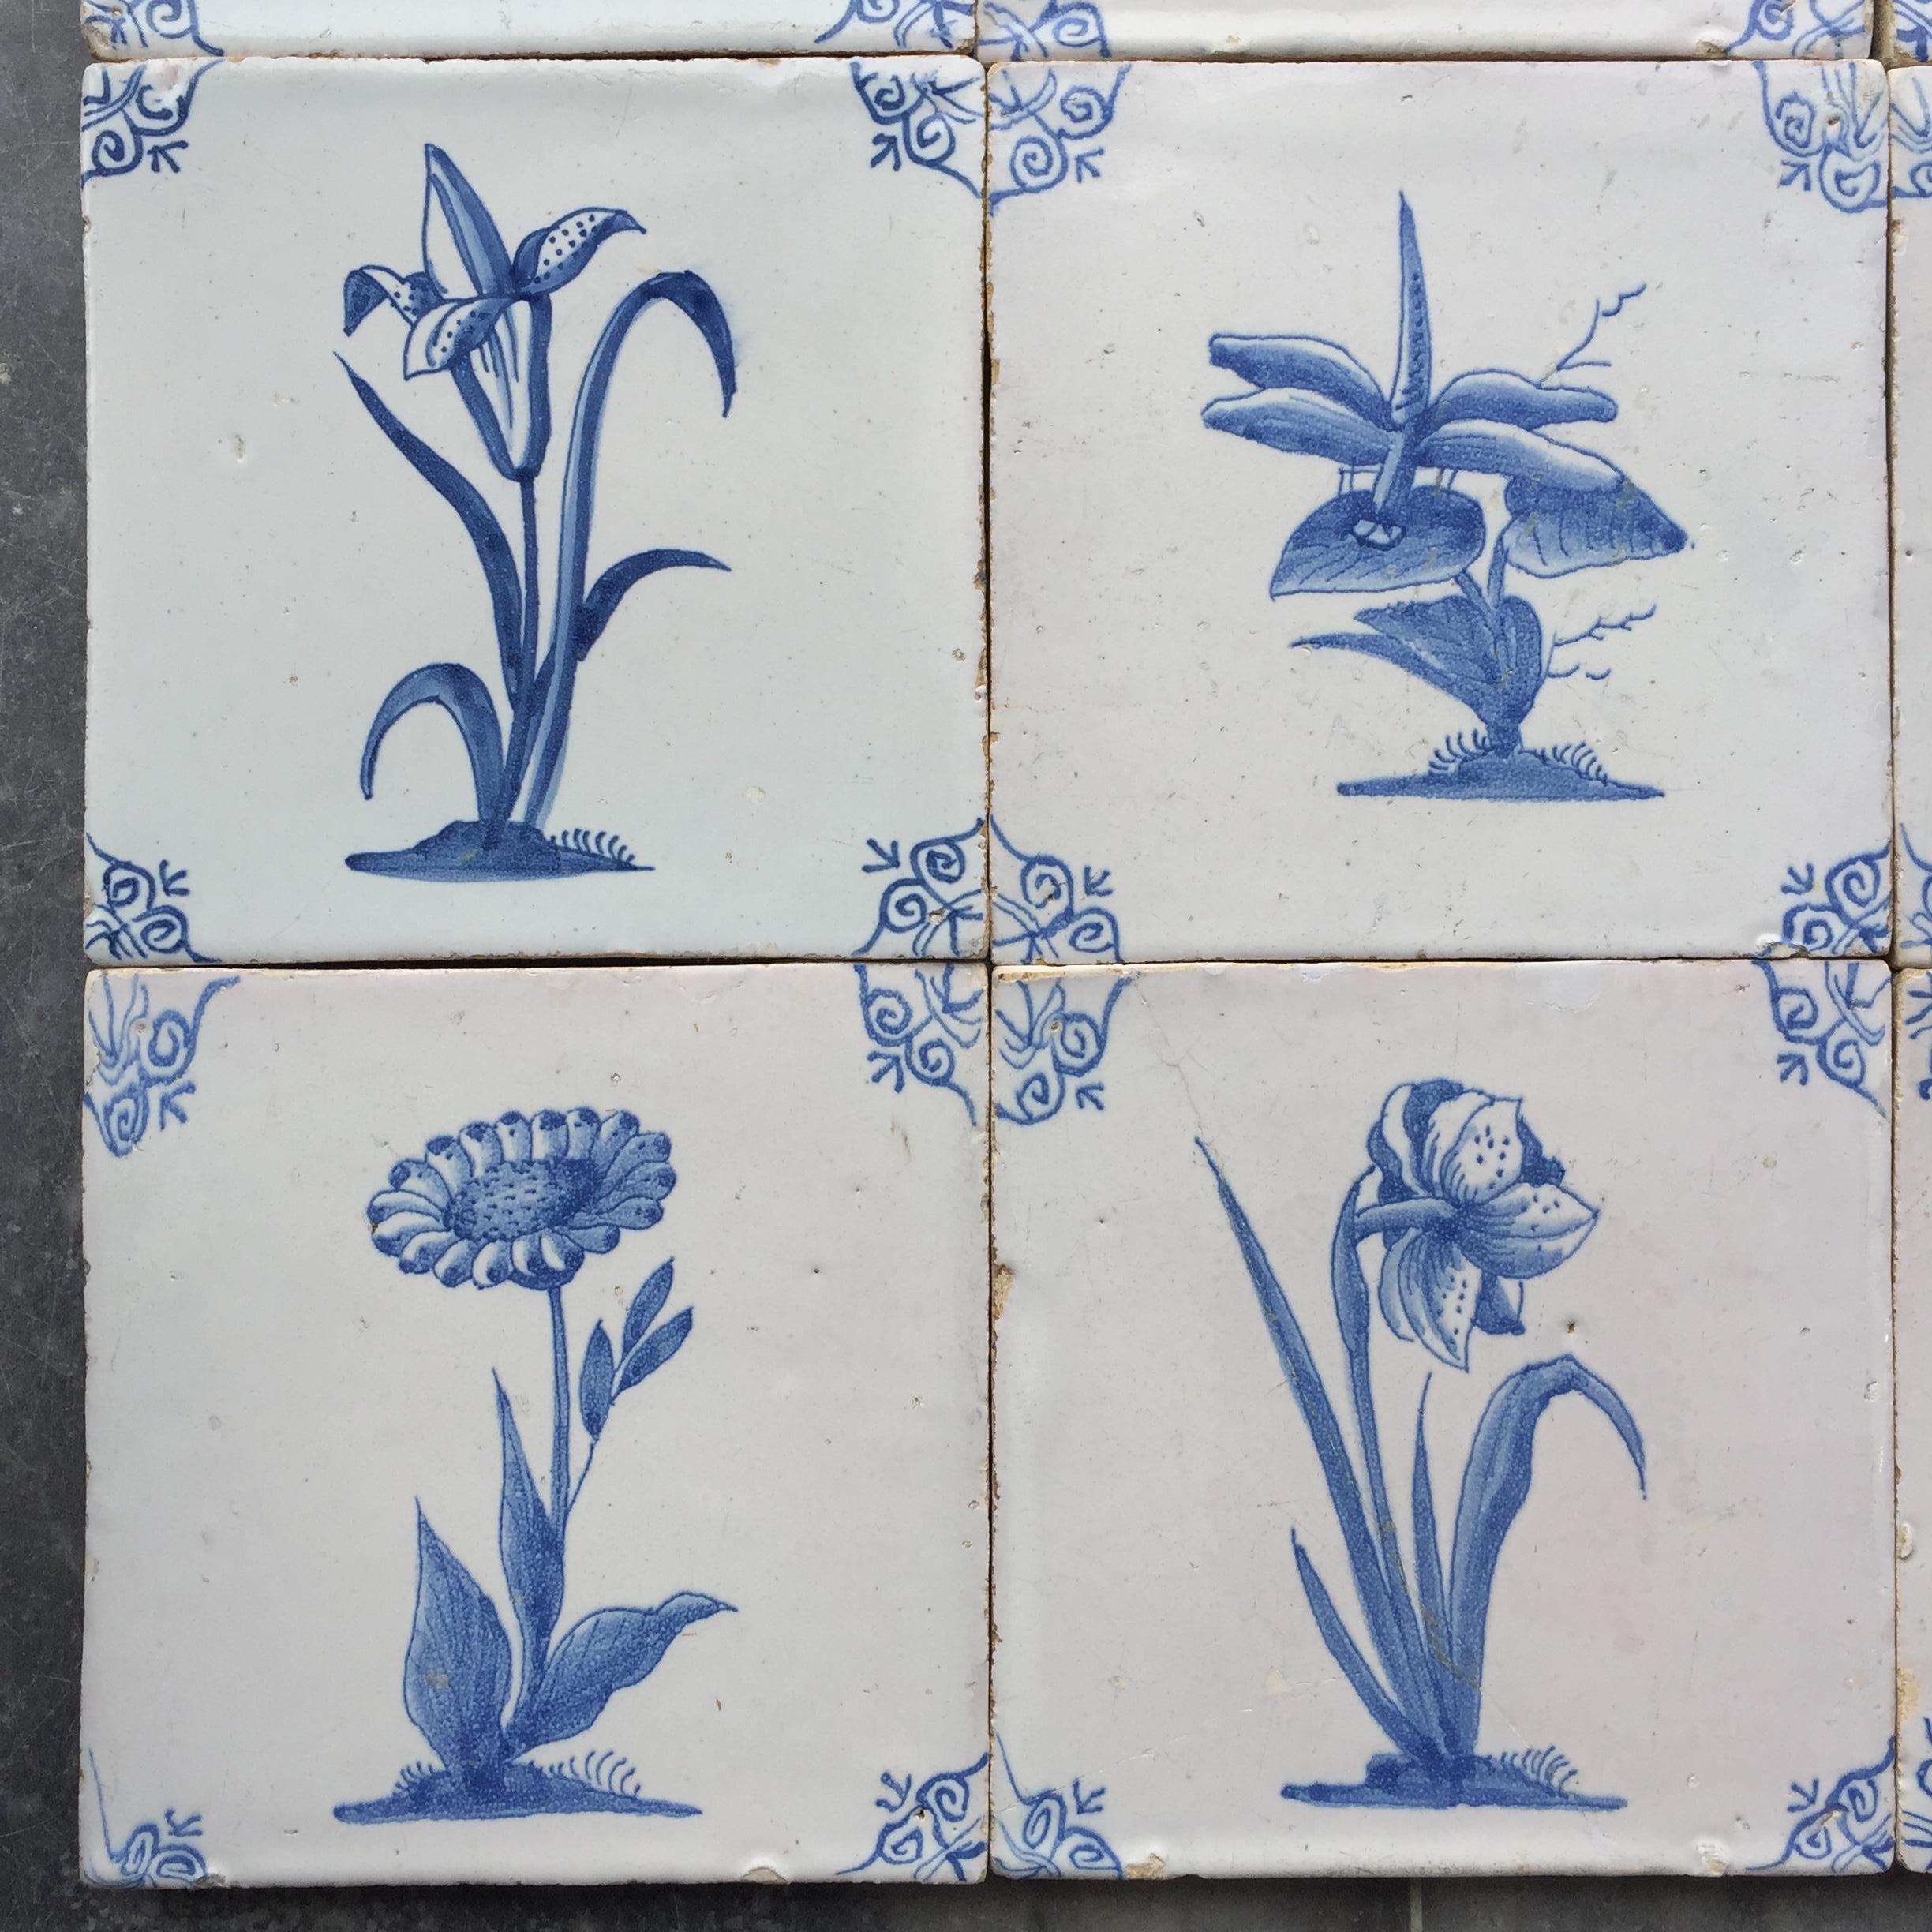 Glazed Rare Set of 12 Dutch Delft Tiles with Flowers and Insects, 17th Century